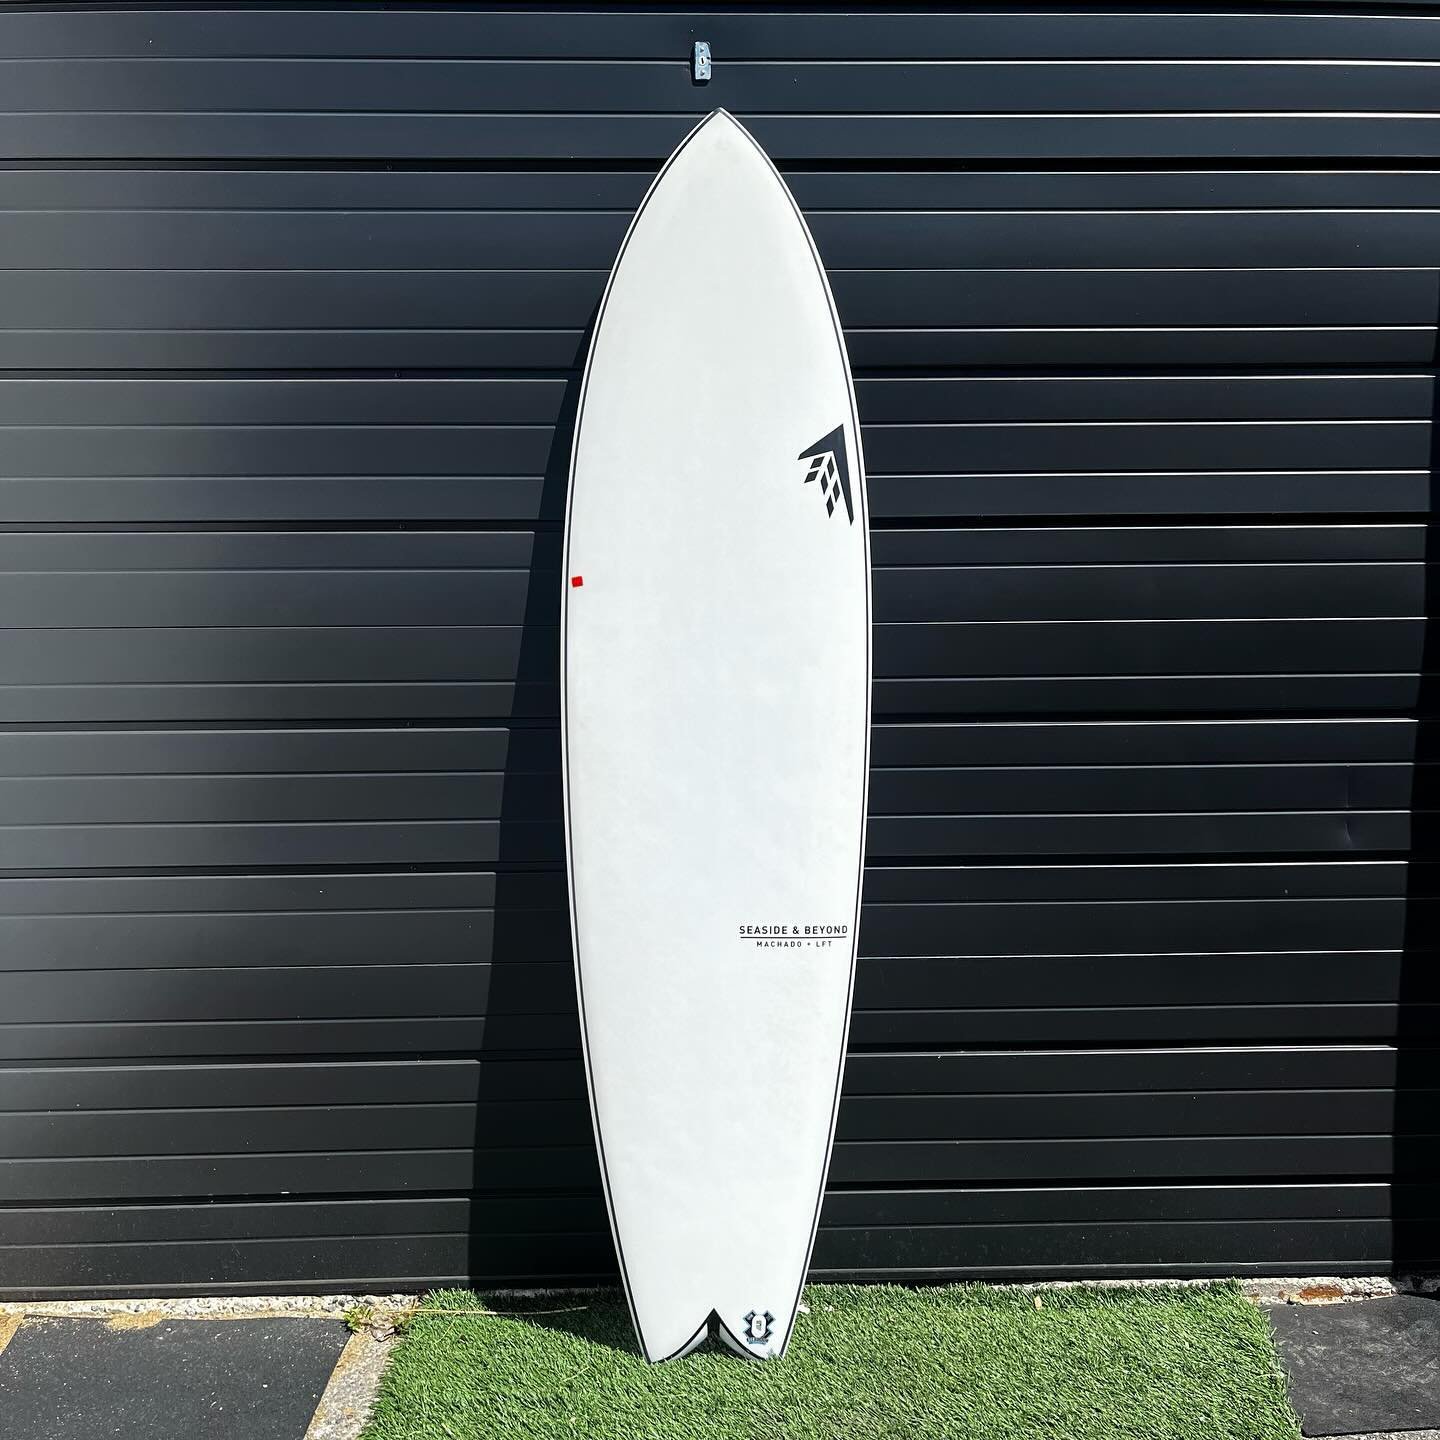 Used once @firewiresurfboards Seaside and Beyond

7&rsquo;0 x 21 3/8 x 2 11/16 @ 45.3L

-$700-